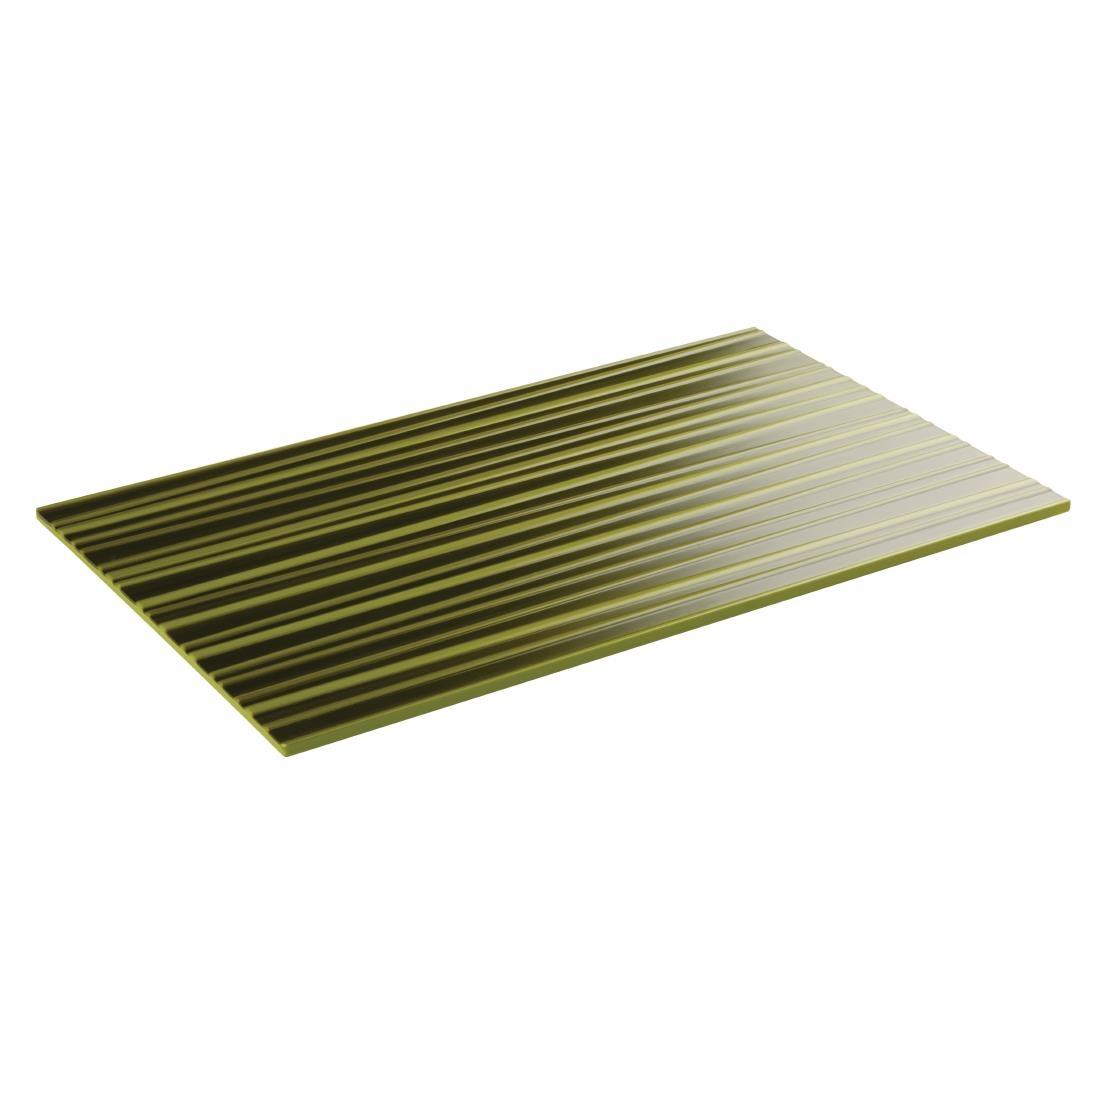 APS Asia+ Bamboo Leaf Tray GN 1/3 - Each - DT760 - 1